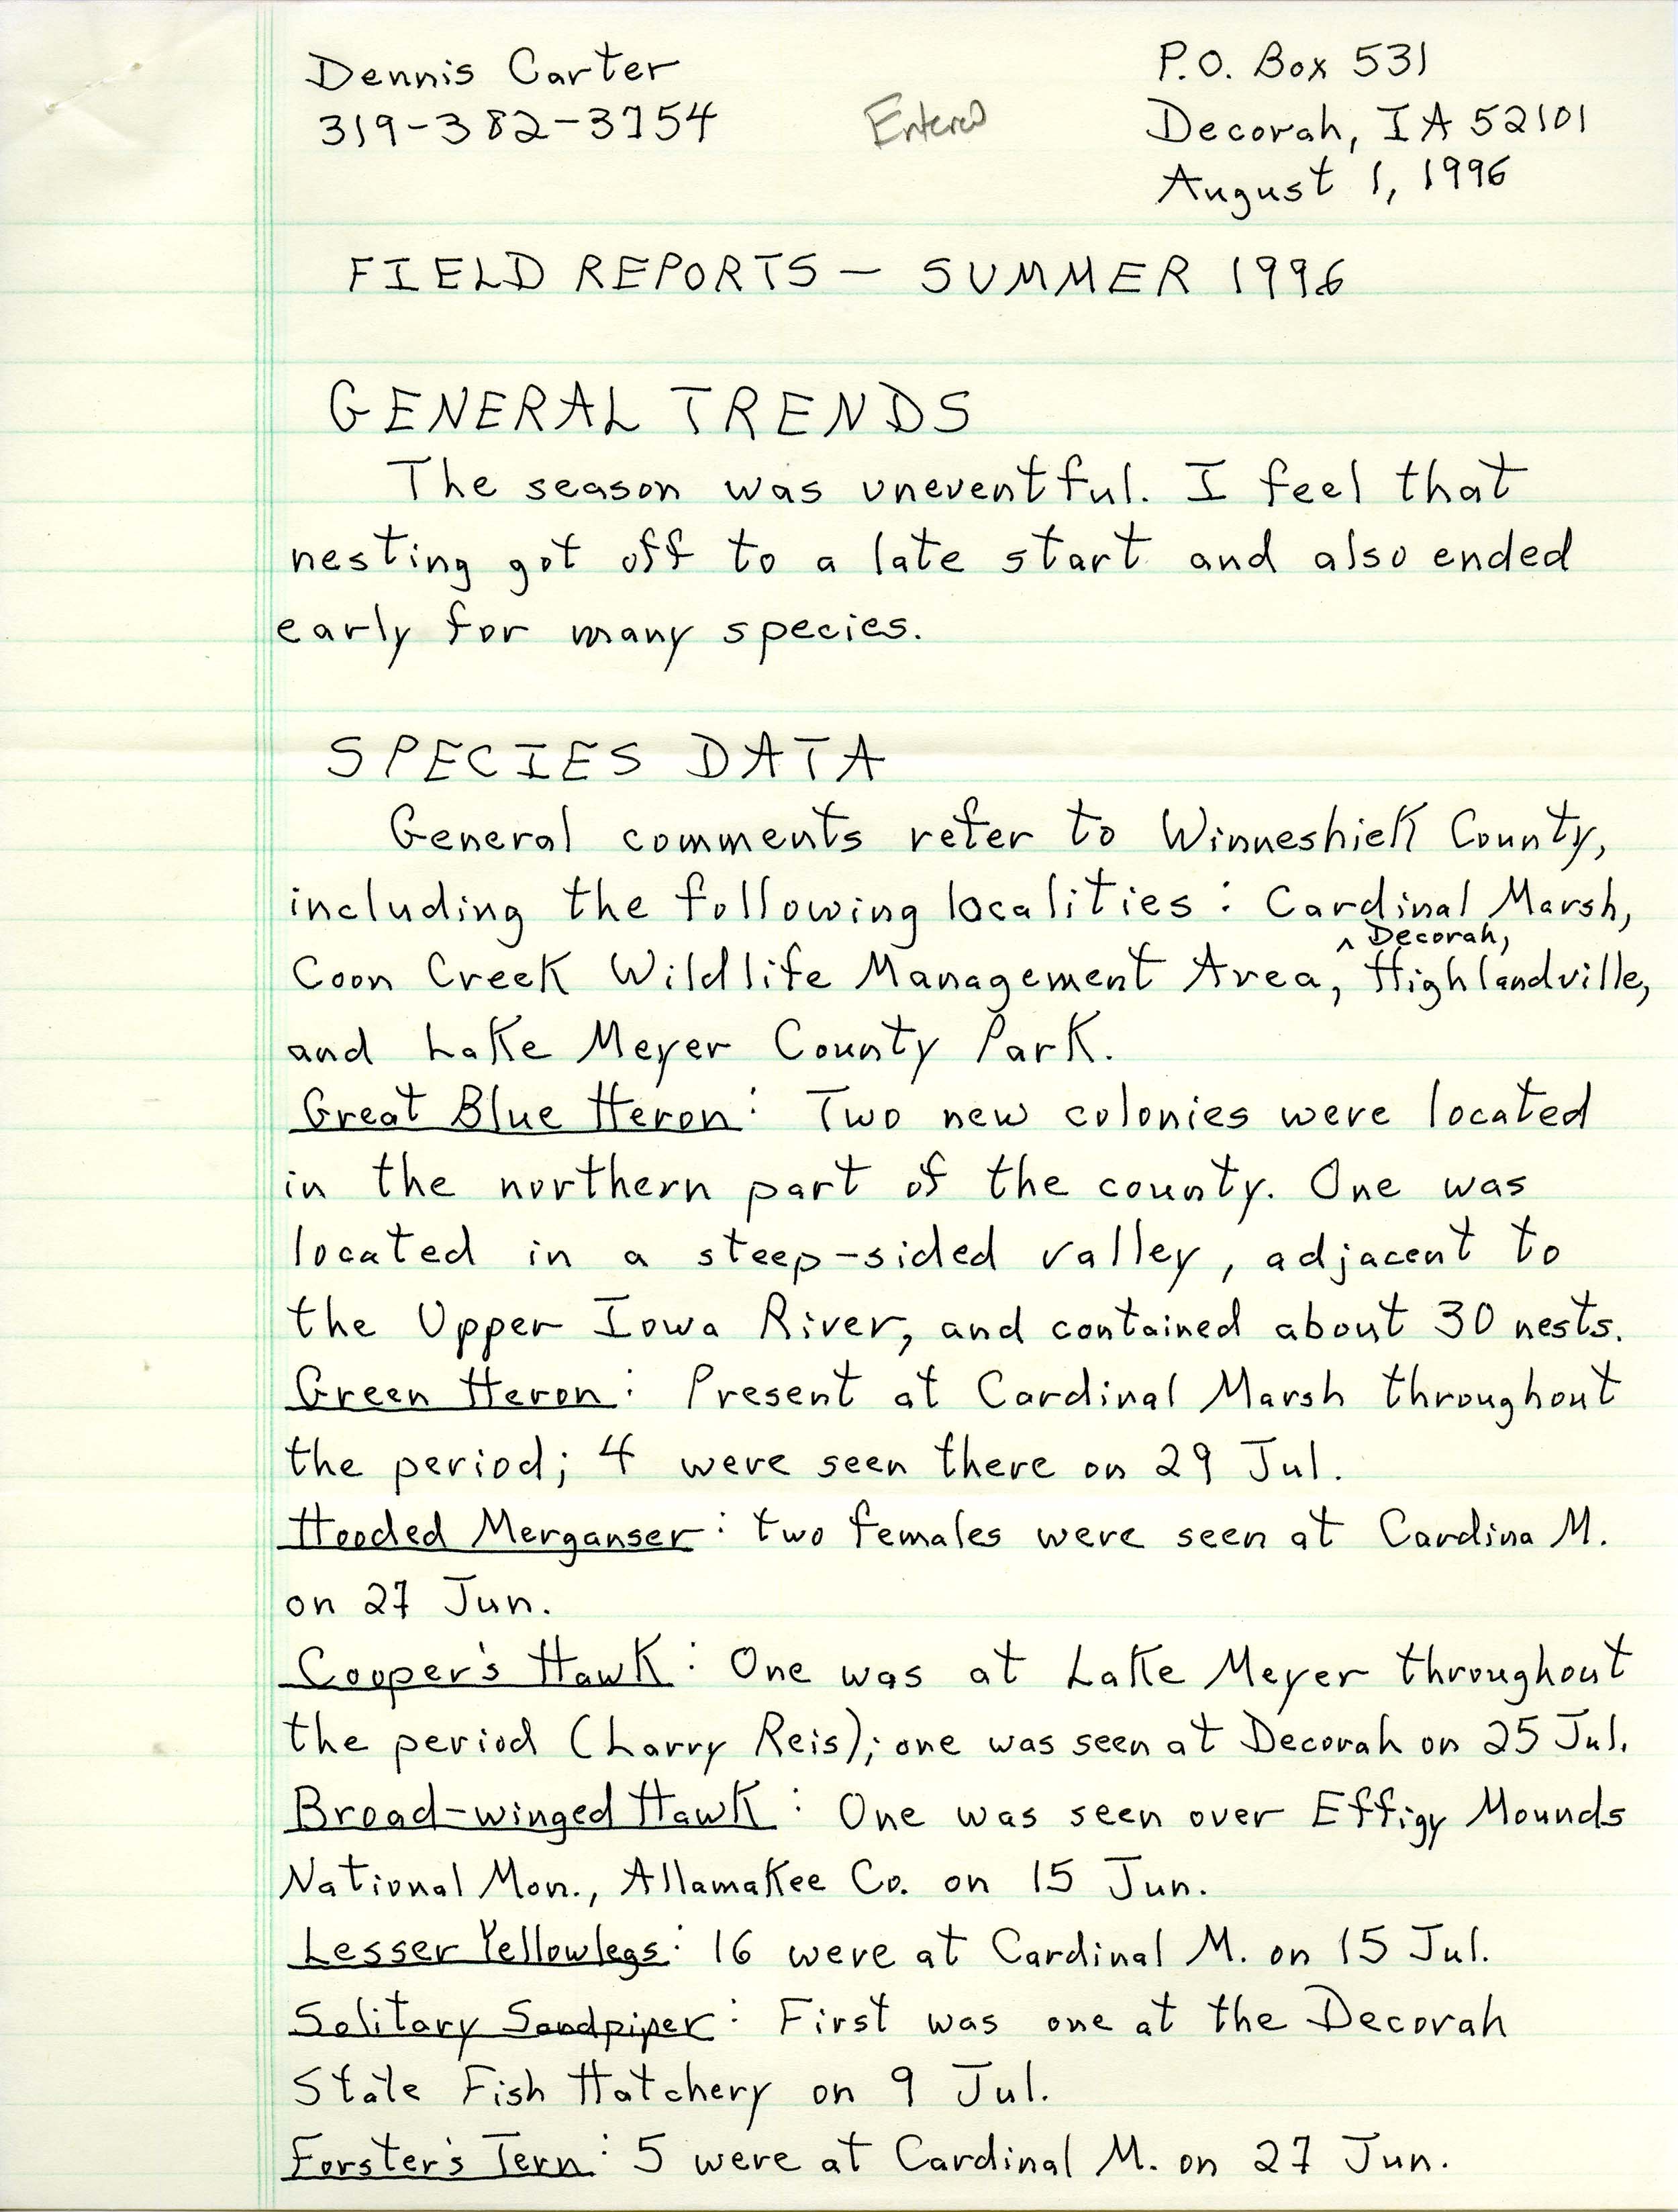 Field notes contributed by Dennis L. Carter, August 1, 1996